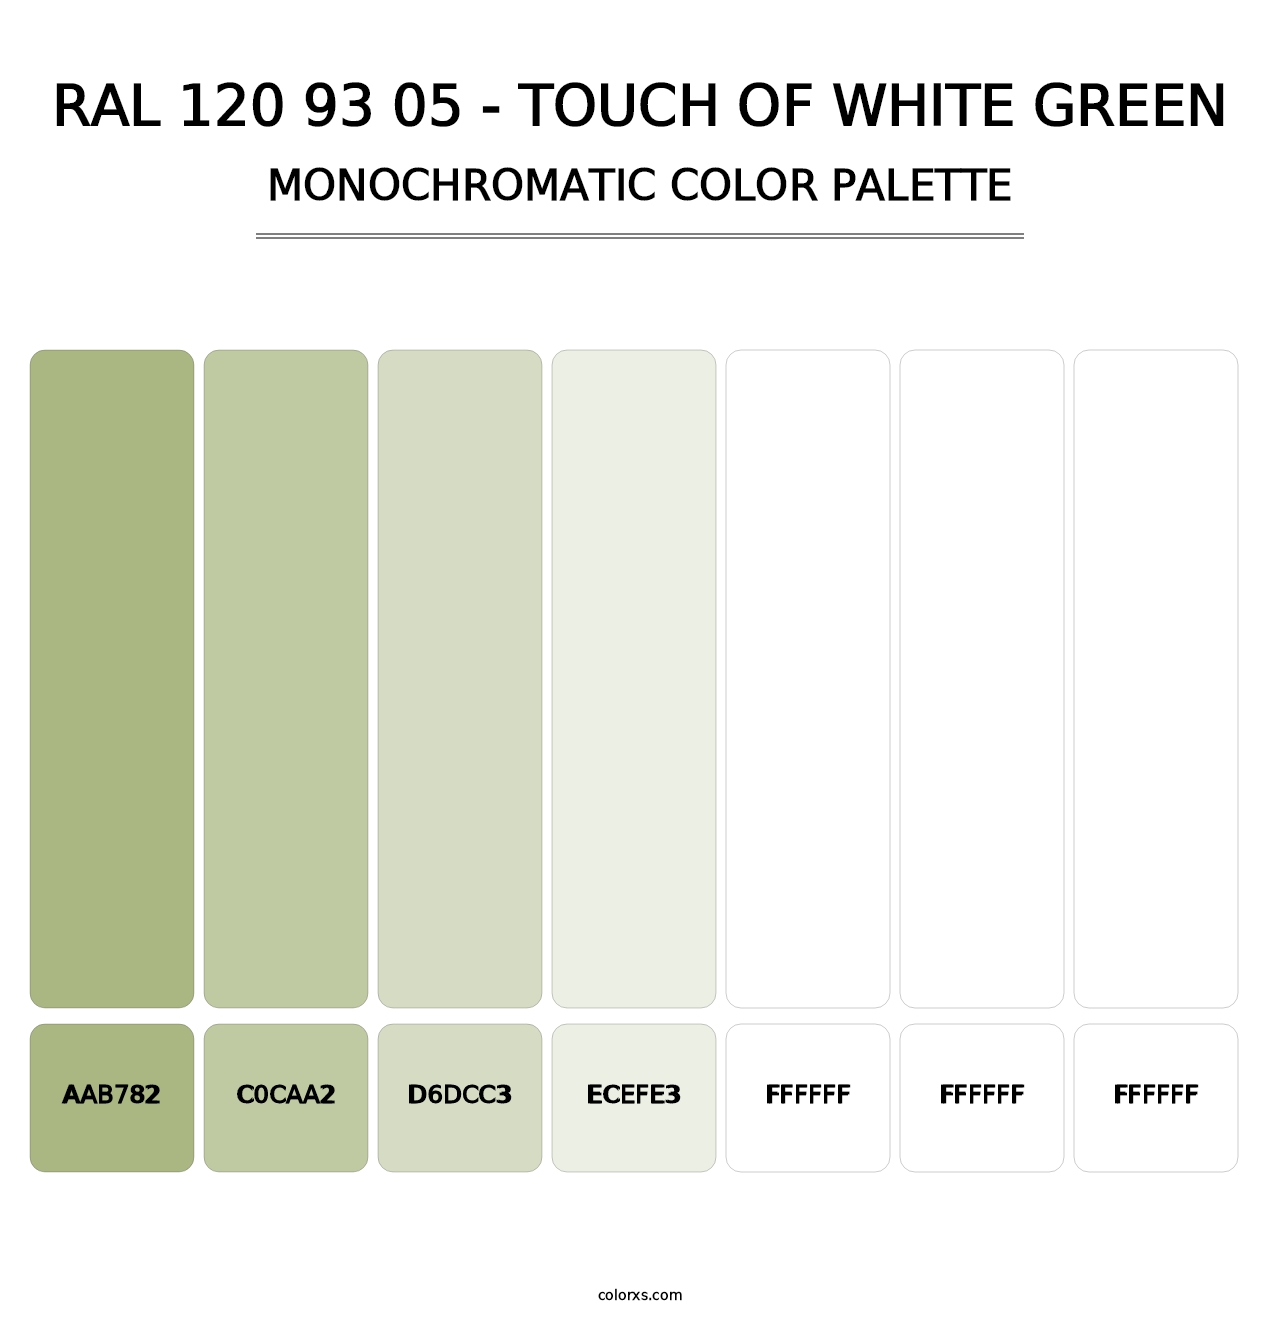 RAL 120 93 05 - Touch Of White Green - Monochromatic Color Palette